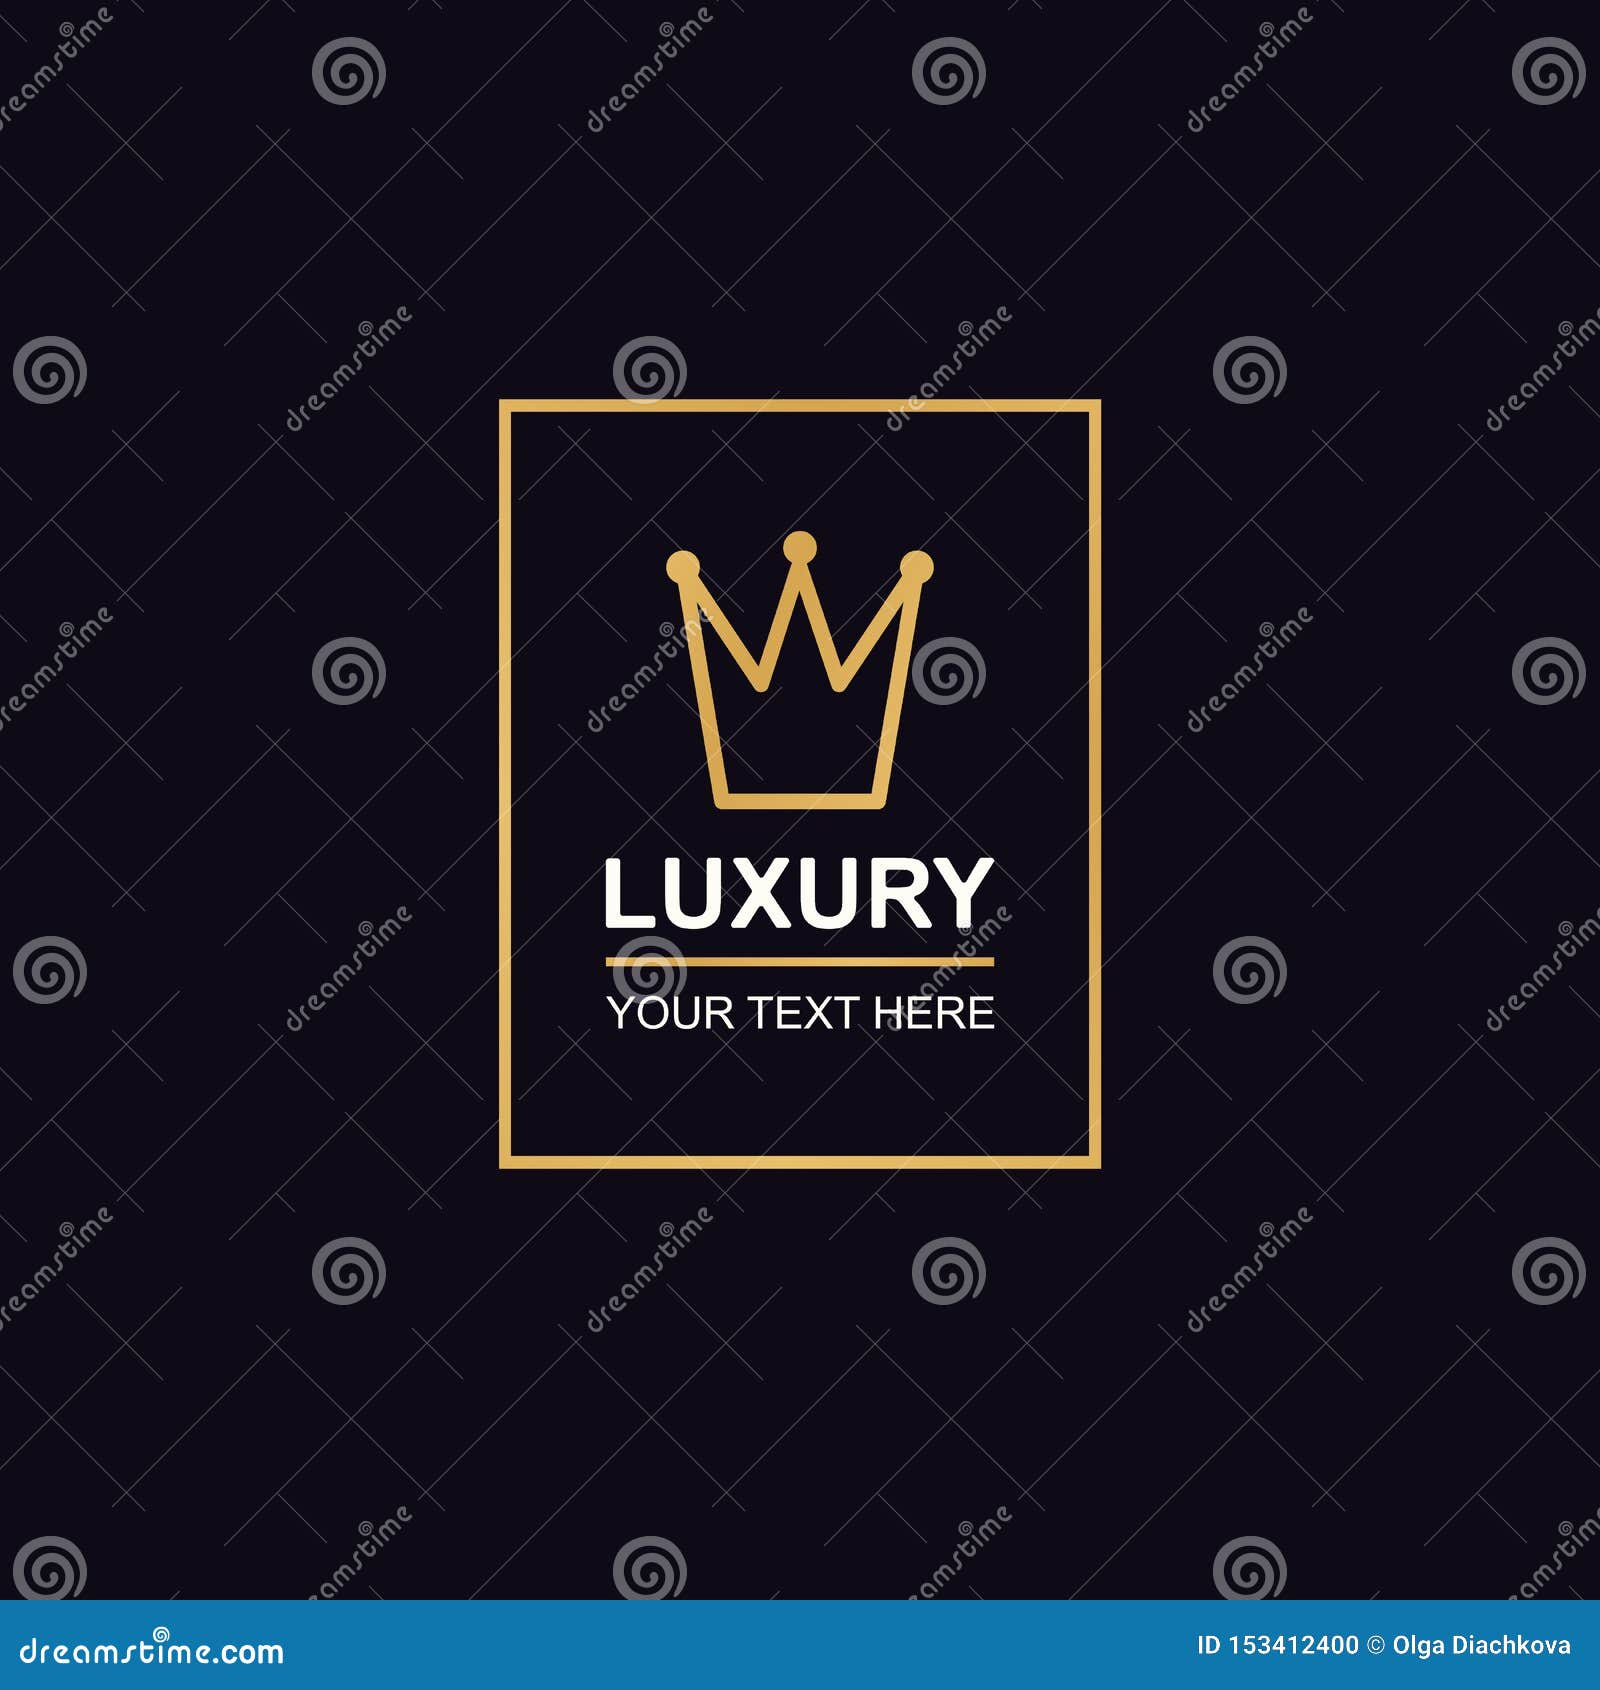 Vector Luxury Crown Sign Gold Style Stock Vector - Illustration of ...